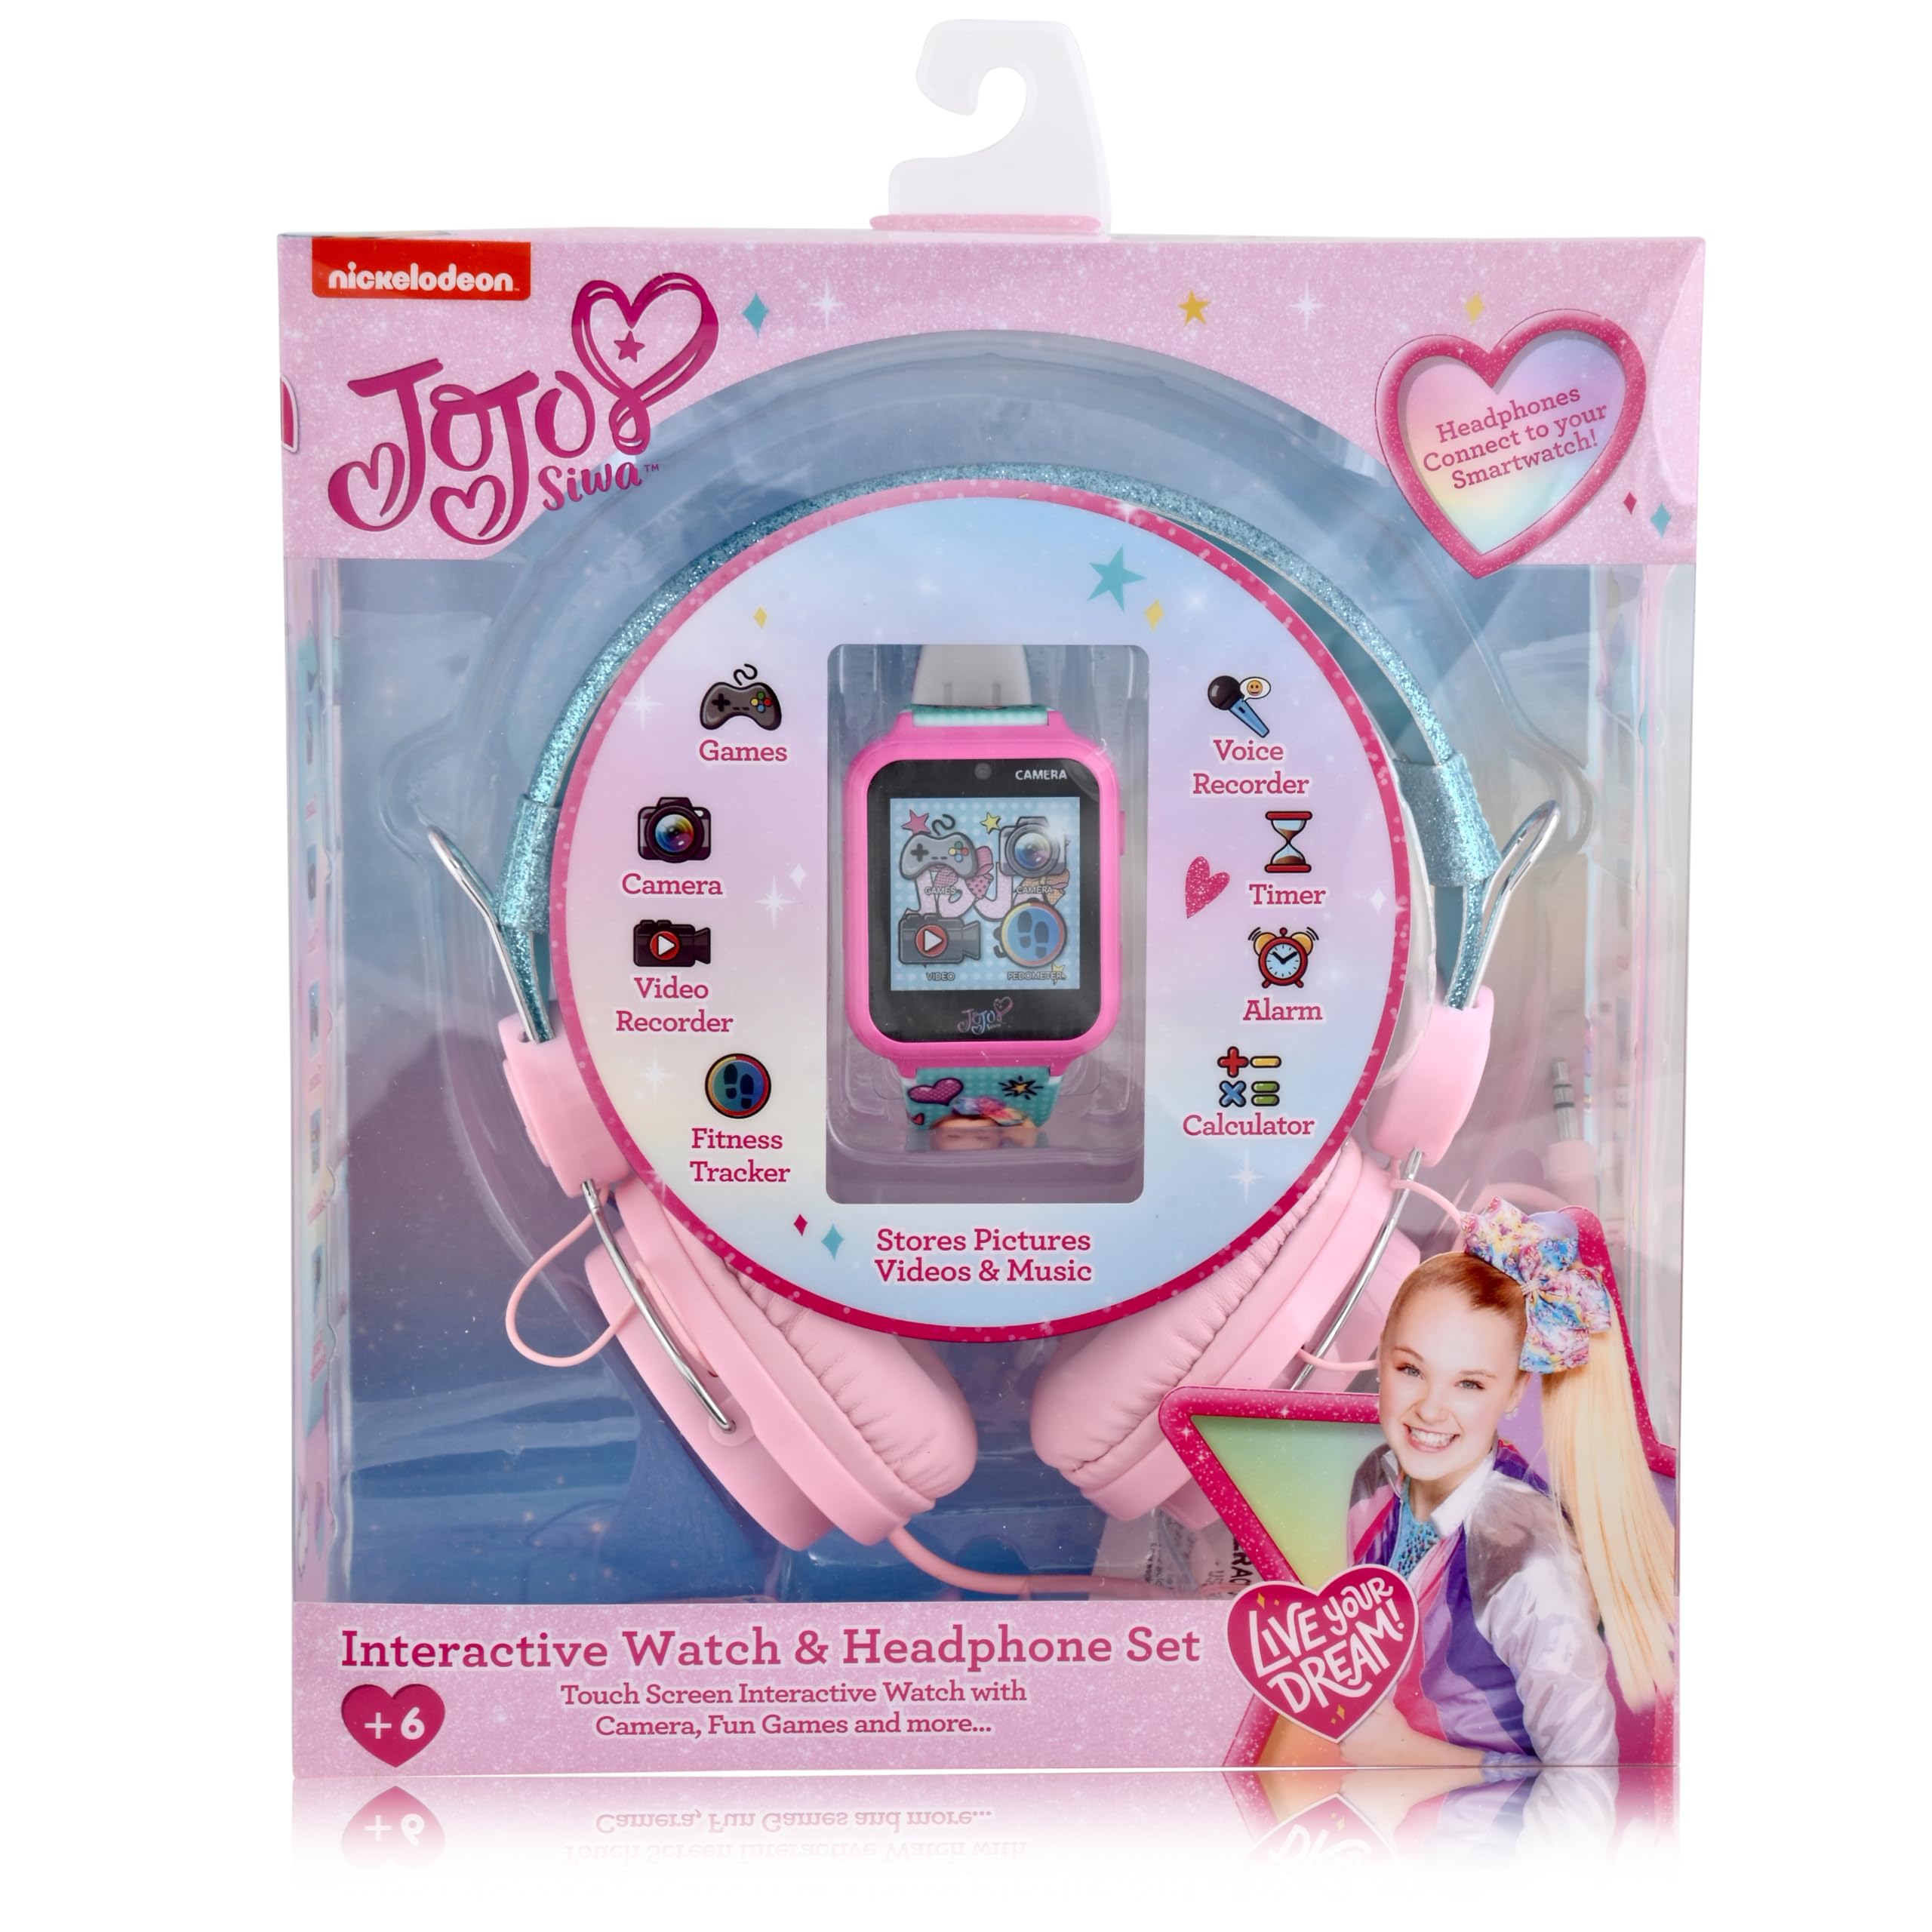 Accutime JoJo Siwa Nickelodeon Educational Learning Smart Watch Toy for Girls with Matching Green and Pink Headphones (Model: JOJ40159AZ)